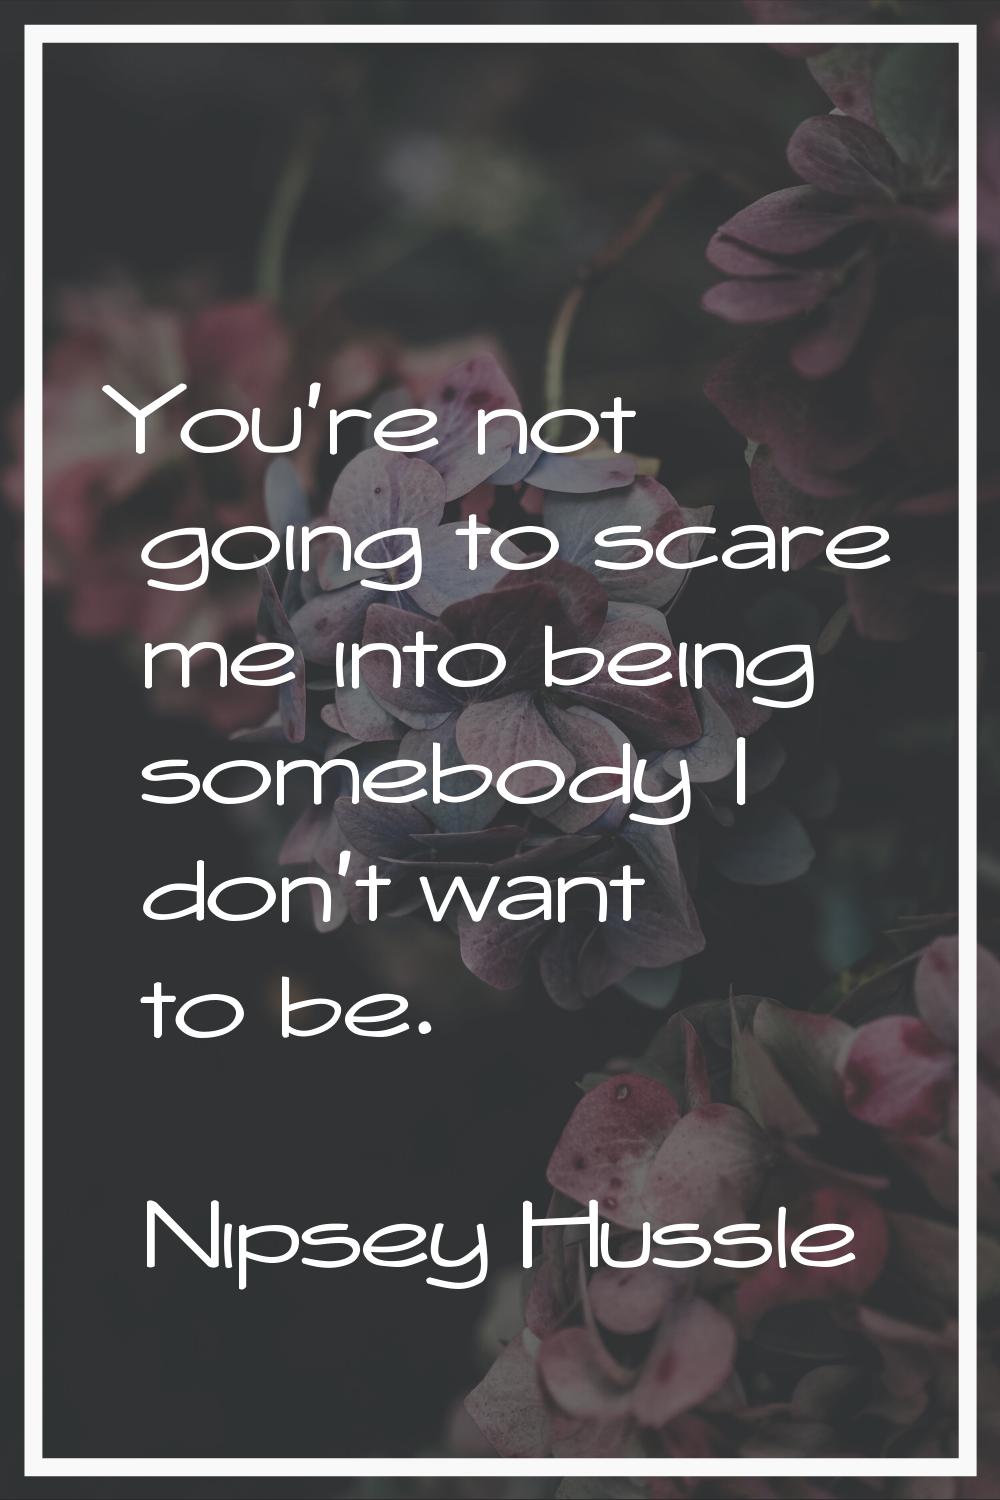 You're not going to scare me into being somebody I don't want to be.